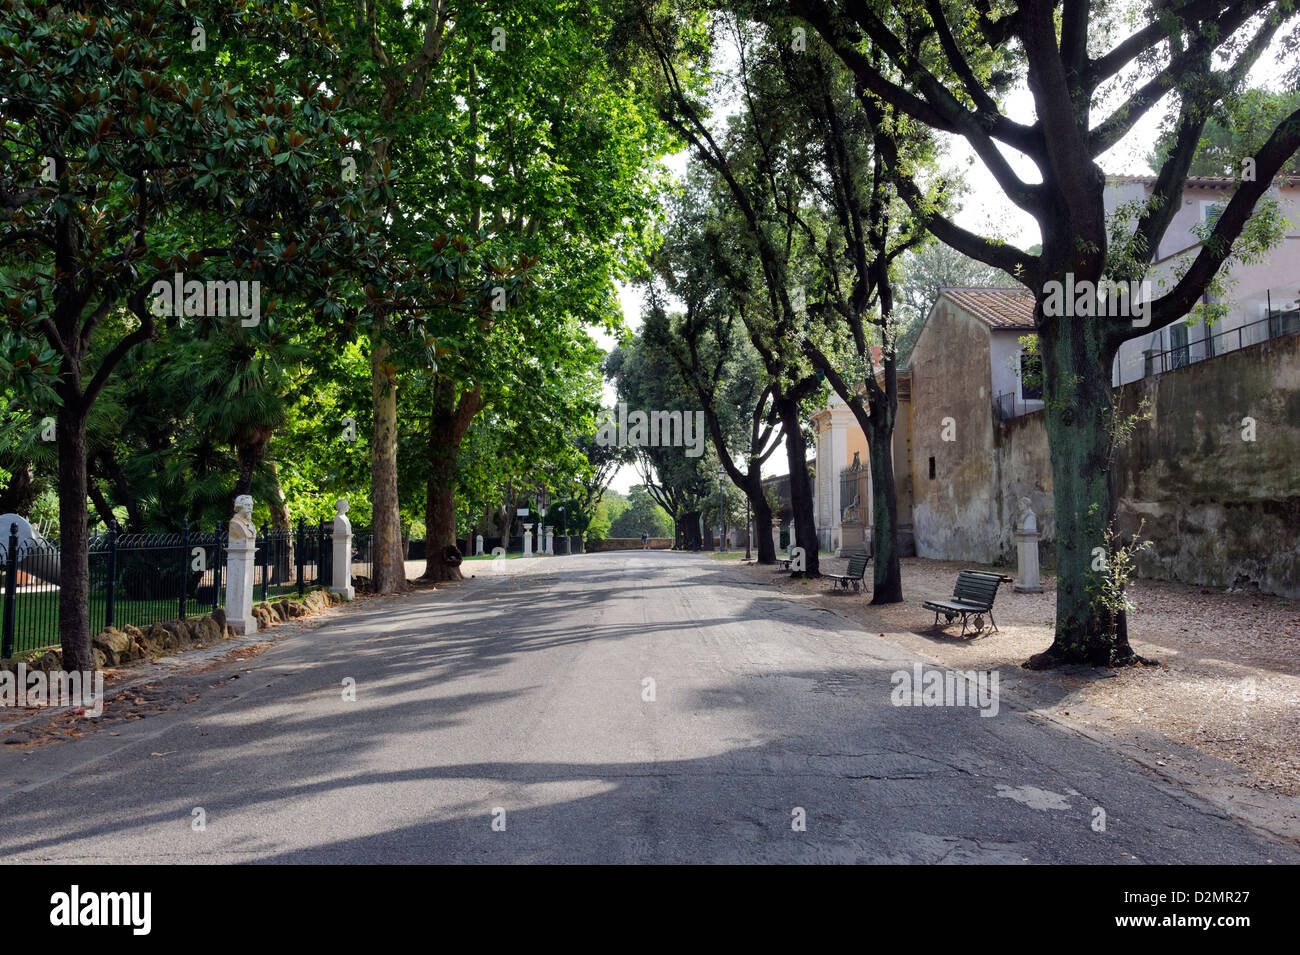 Italy Rome. View on Pincian Pincio Hill of Viale di Villa Medici, a leafy avenue lined with marble busts of celebrated Italians. Stock Photo